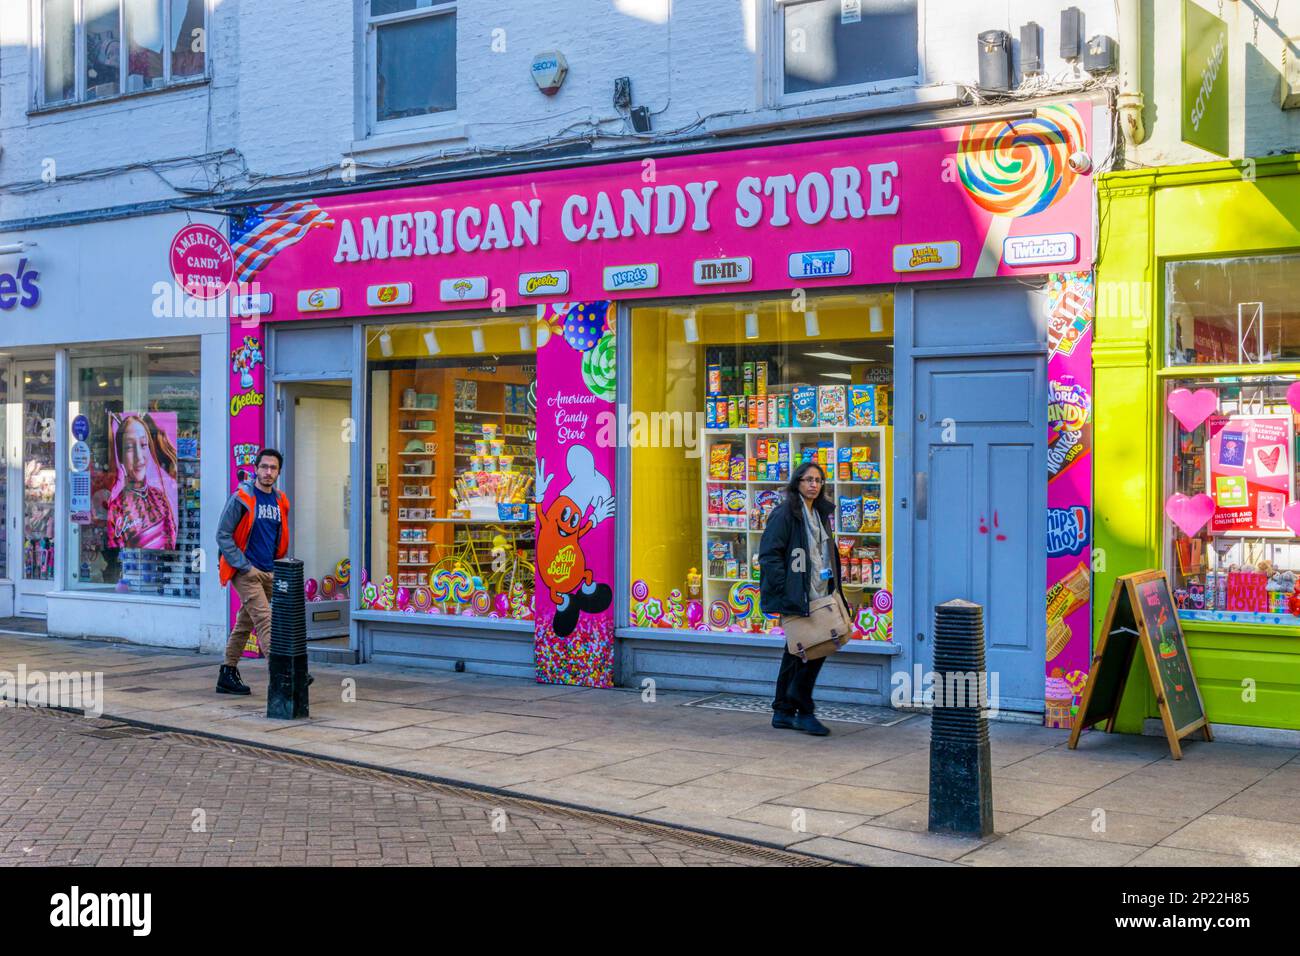 American Candy Store in Cambridge. Stockfoto